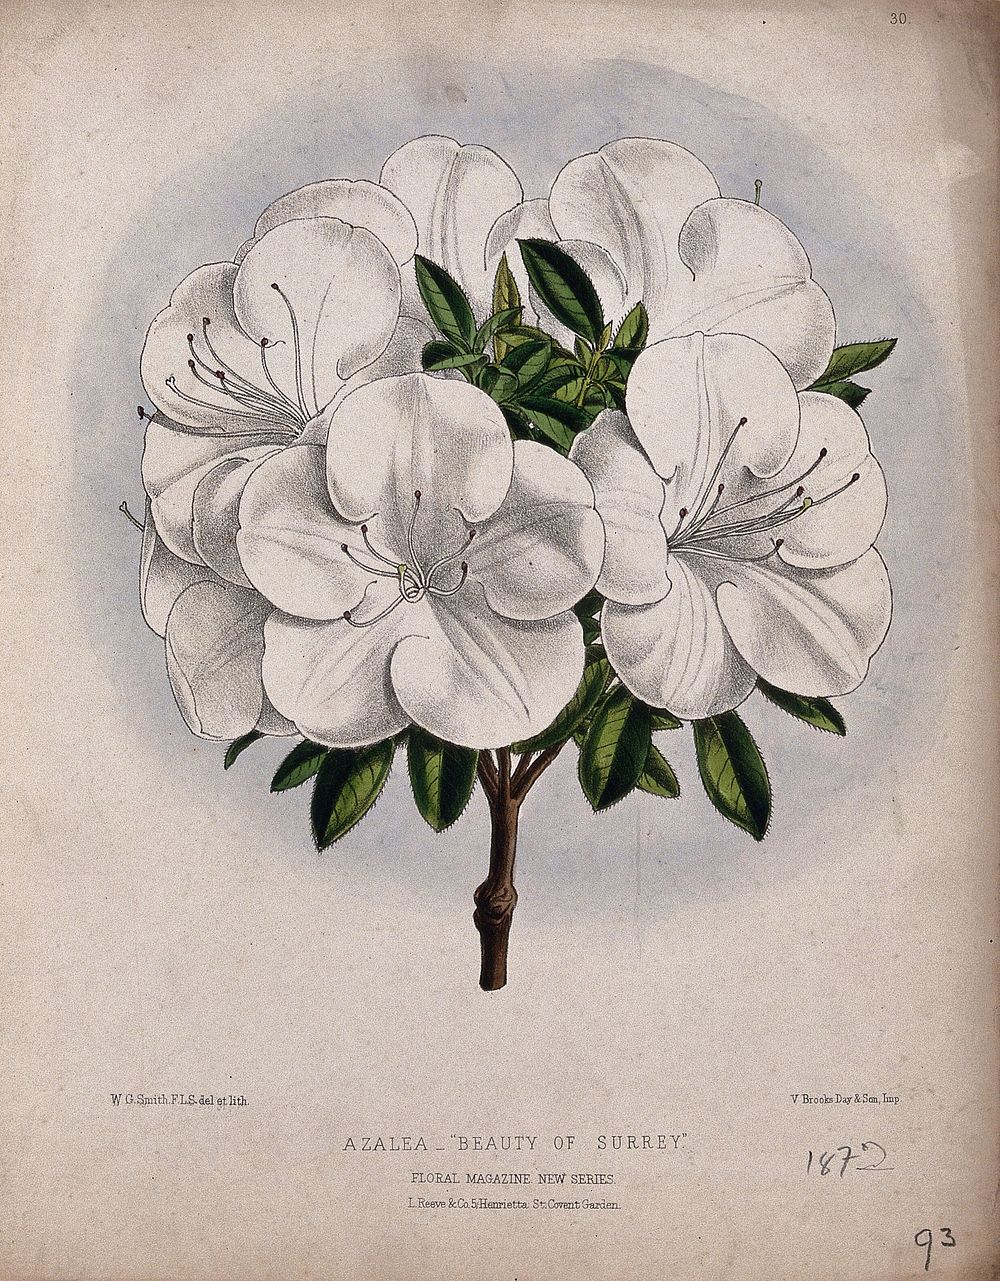 An azalea (Rhododendron species): flowering stem. Coloured lithograph by W. G. Smith, c. 1872, after himself.